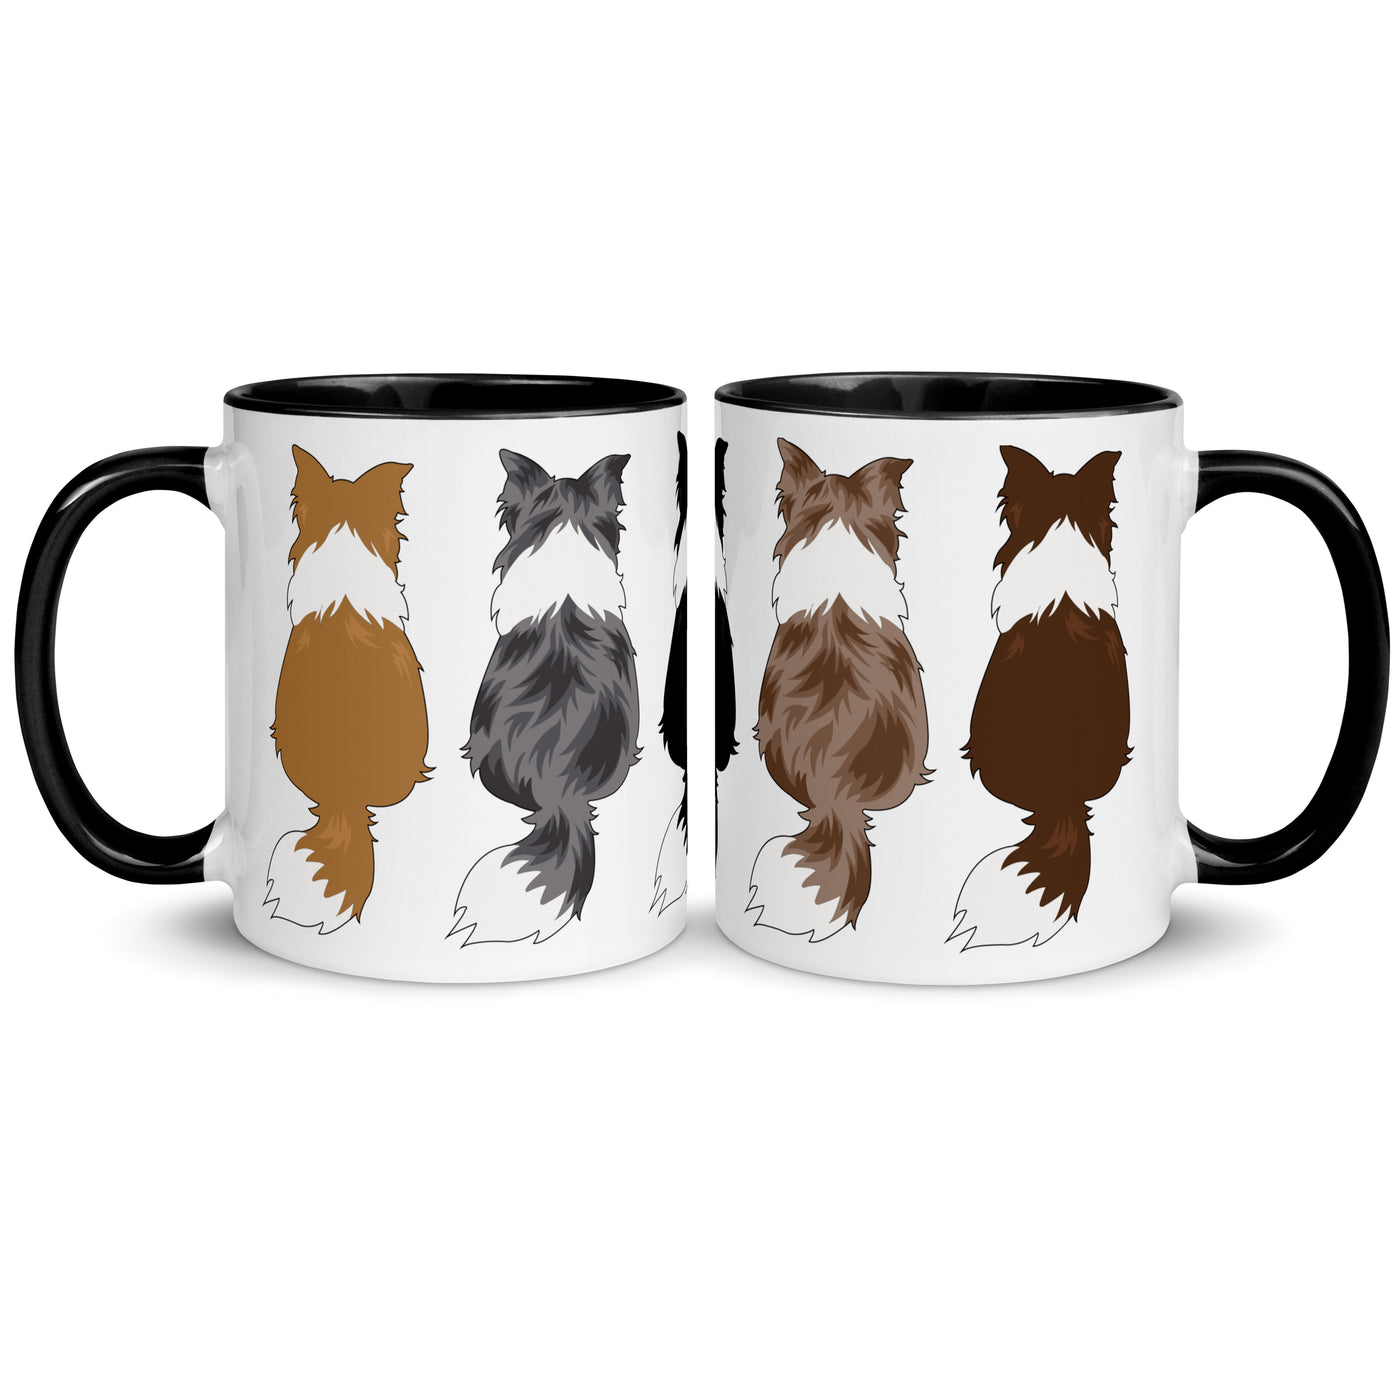 border collie mug | Border collie gift for border collie lovers and dog owners